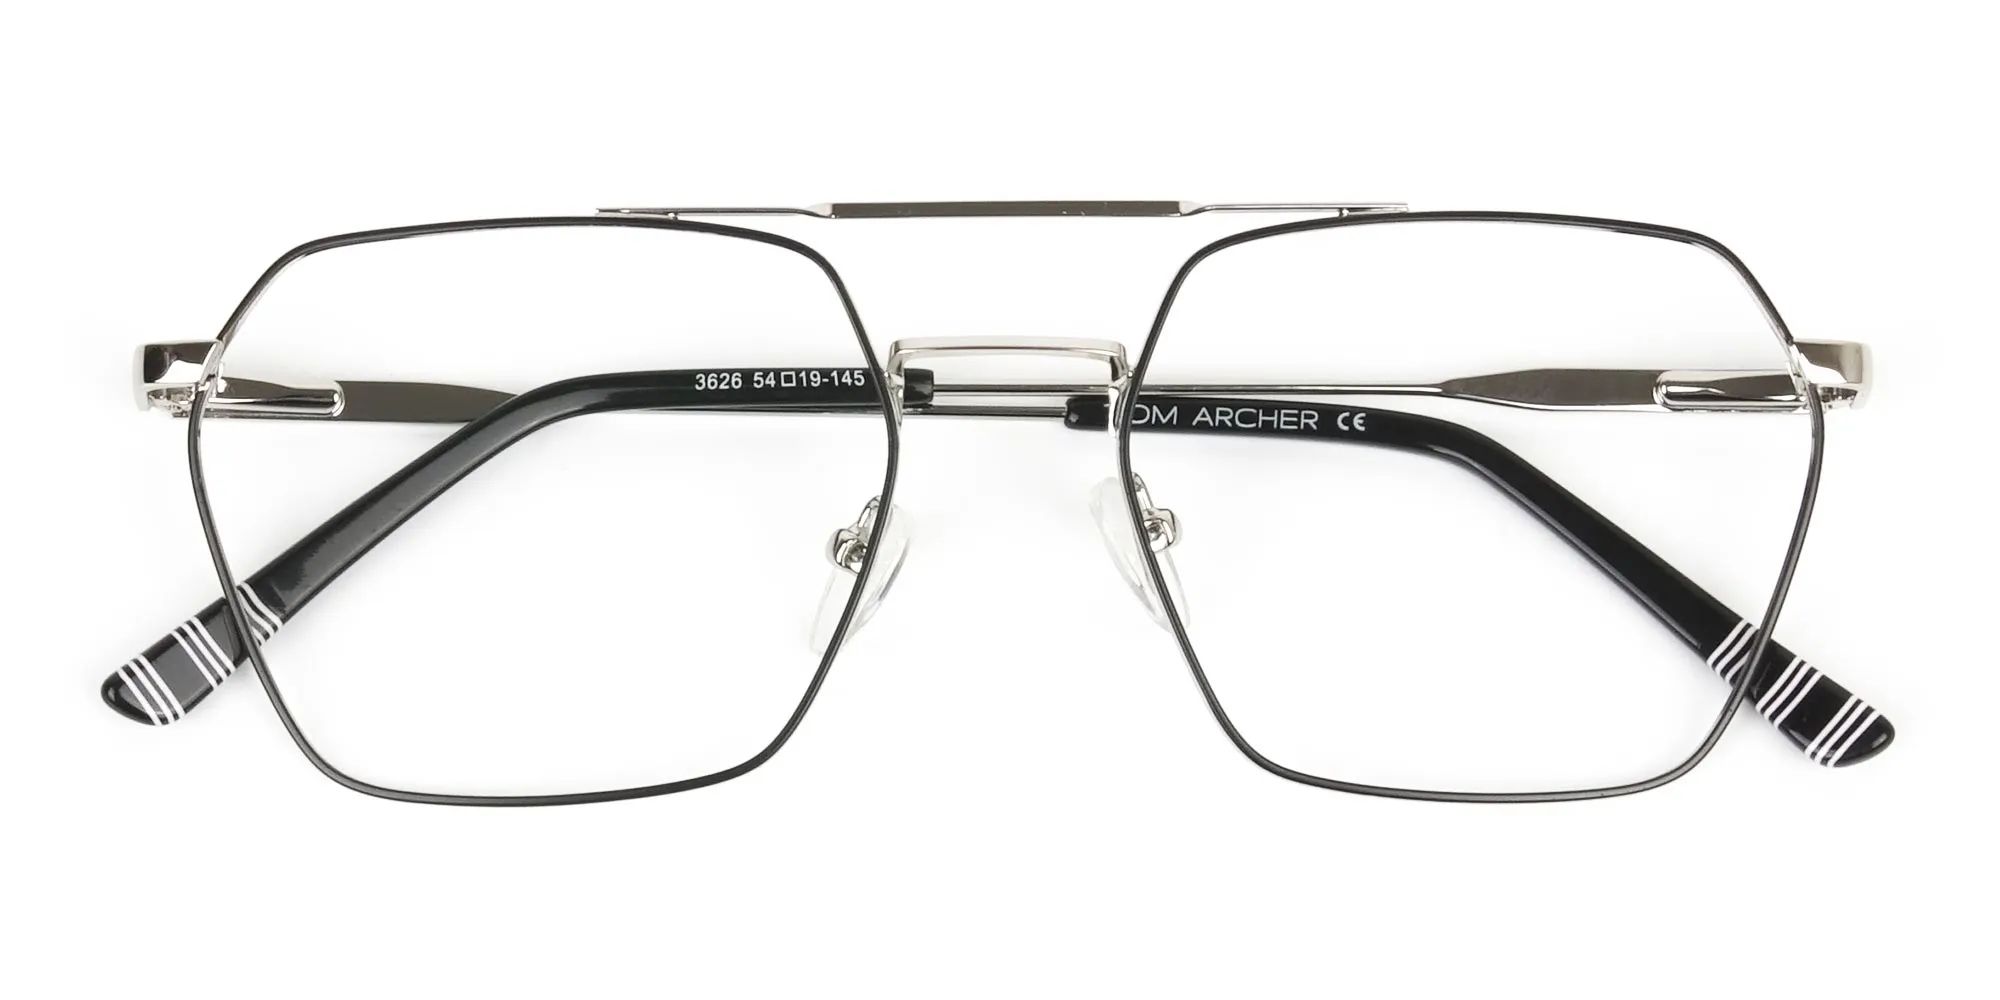 Black & Silver Thin Metal Glasses in Hipster Geometric Frame - 2